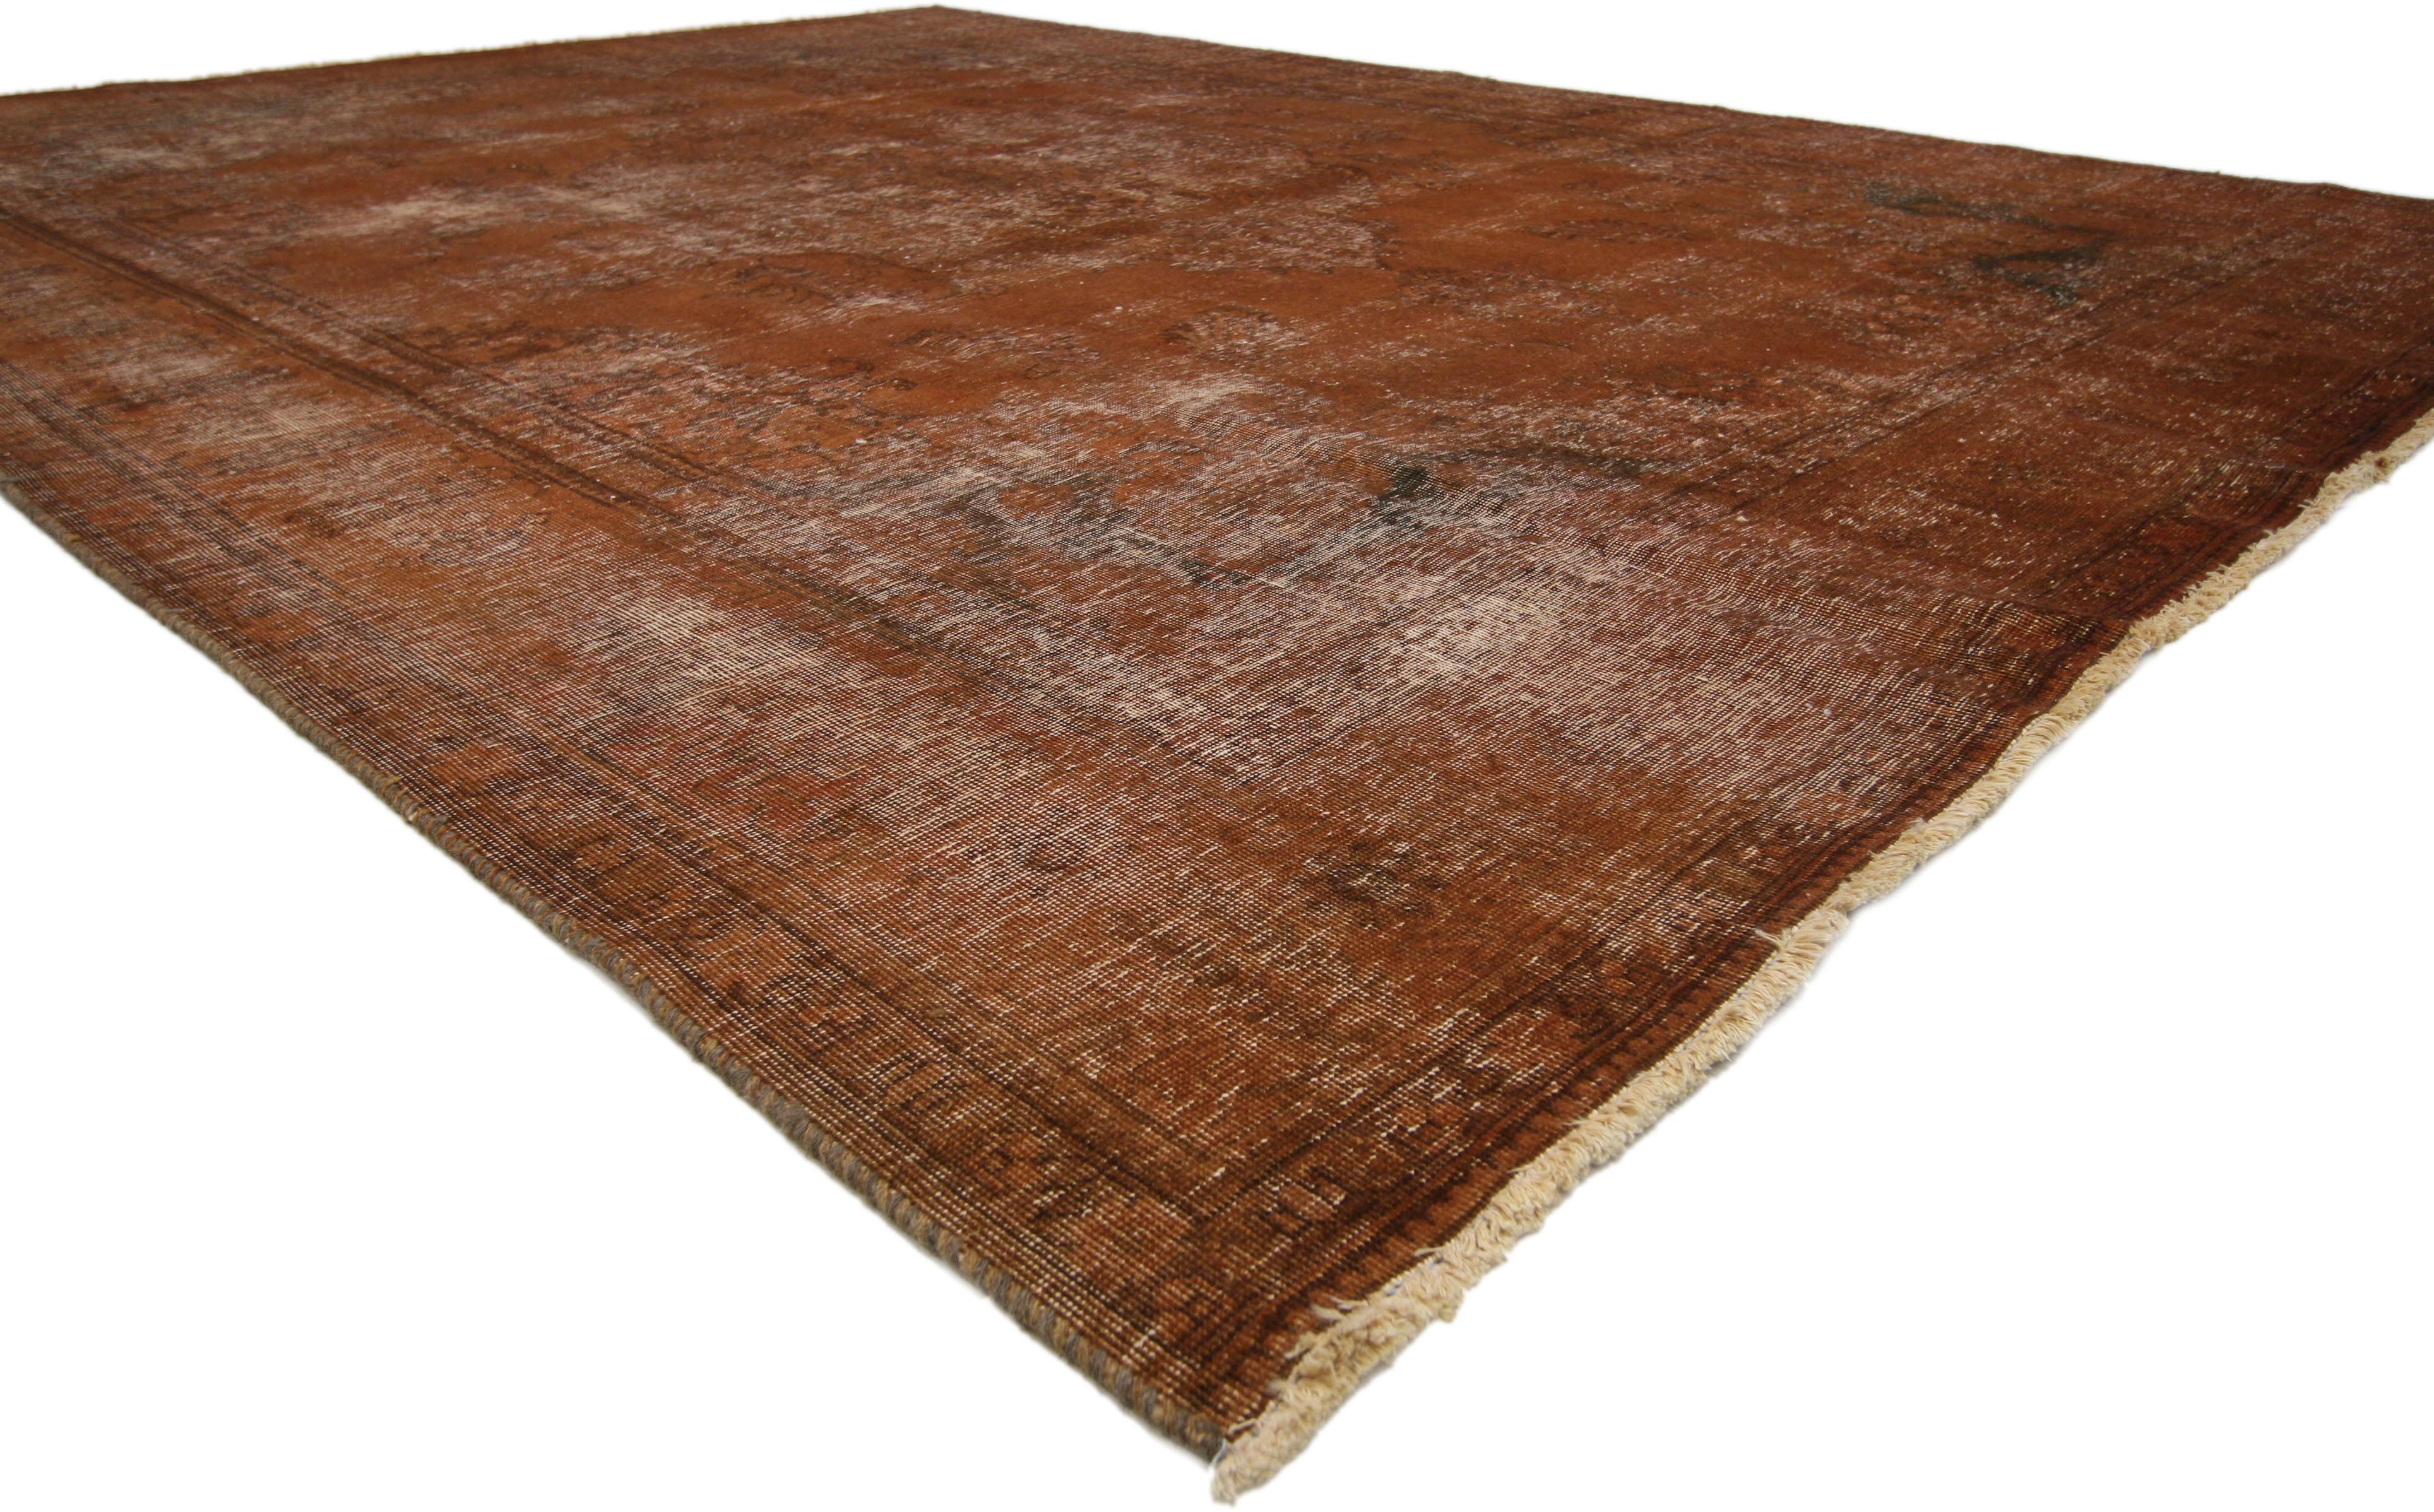 60691 Autumn Maple Distressed Vintage Turkish Rug with Rustic Industrial Luxe Style. Defined, dazzling and raw combined with luxe utilitarian appeal, this distressed overdyed vintage Turkish rug goes beyond the boundaries of design with historical